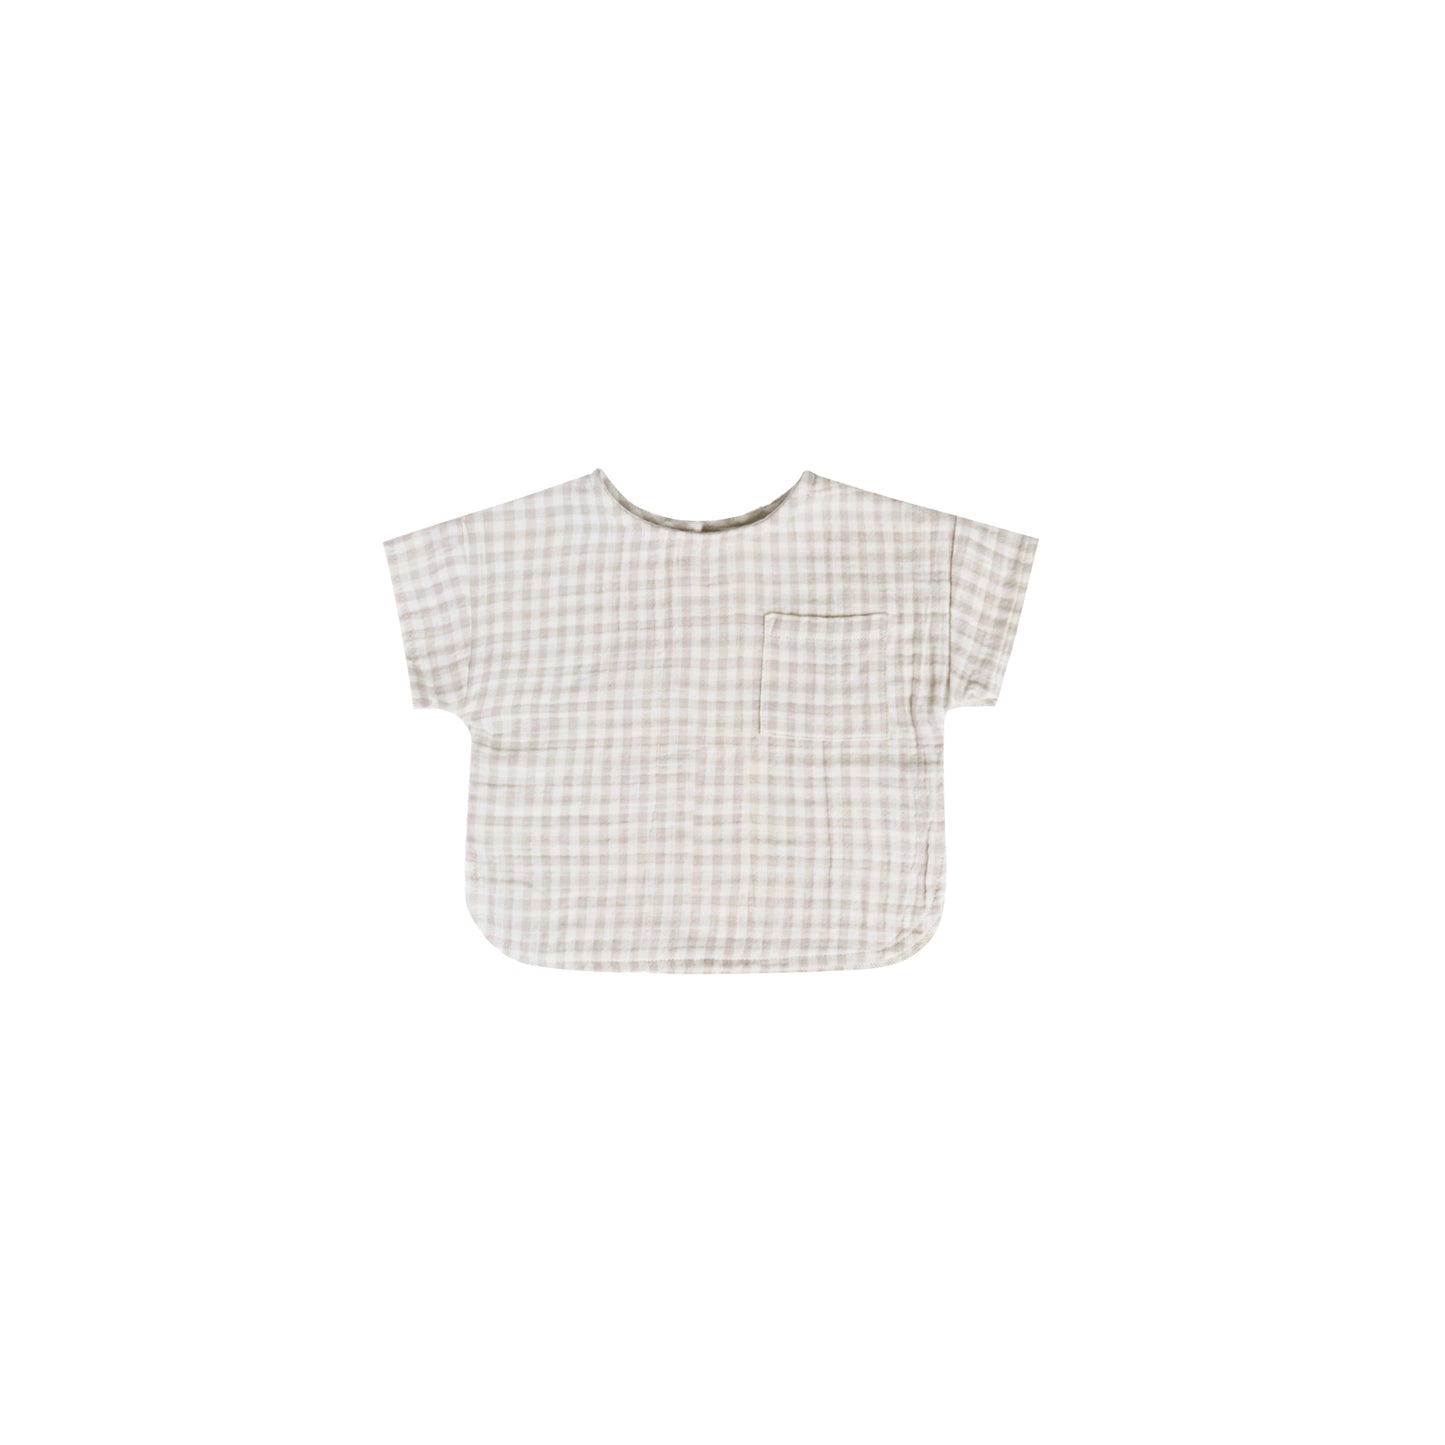 QUINCY MAE Woven Boxy Top Silver Gingham ALWAYS SHOW